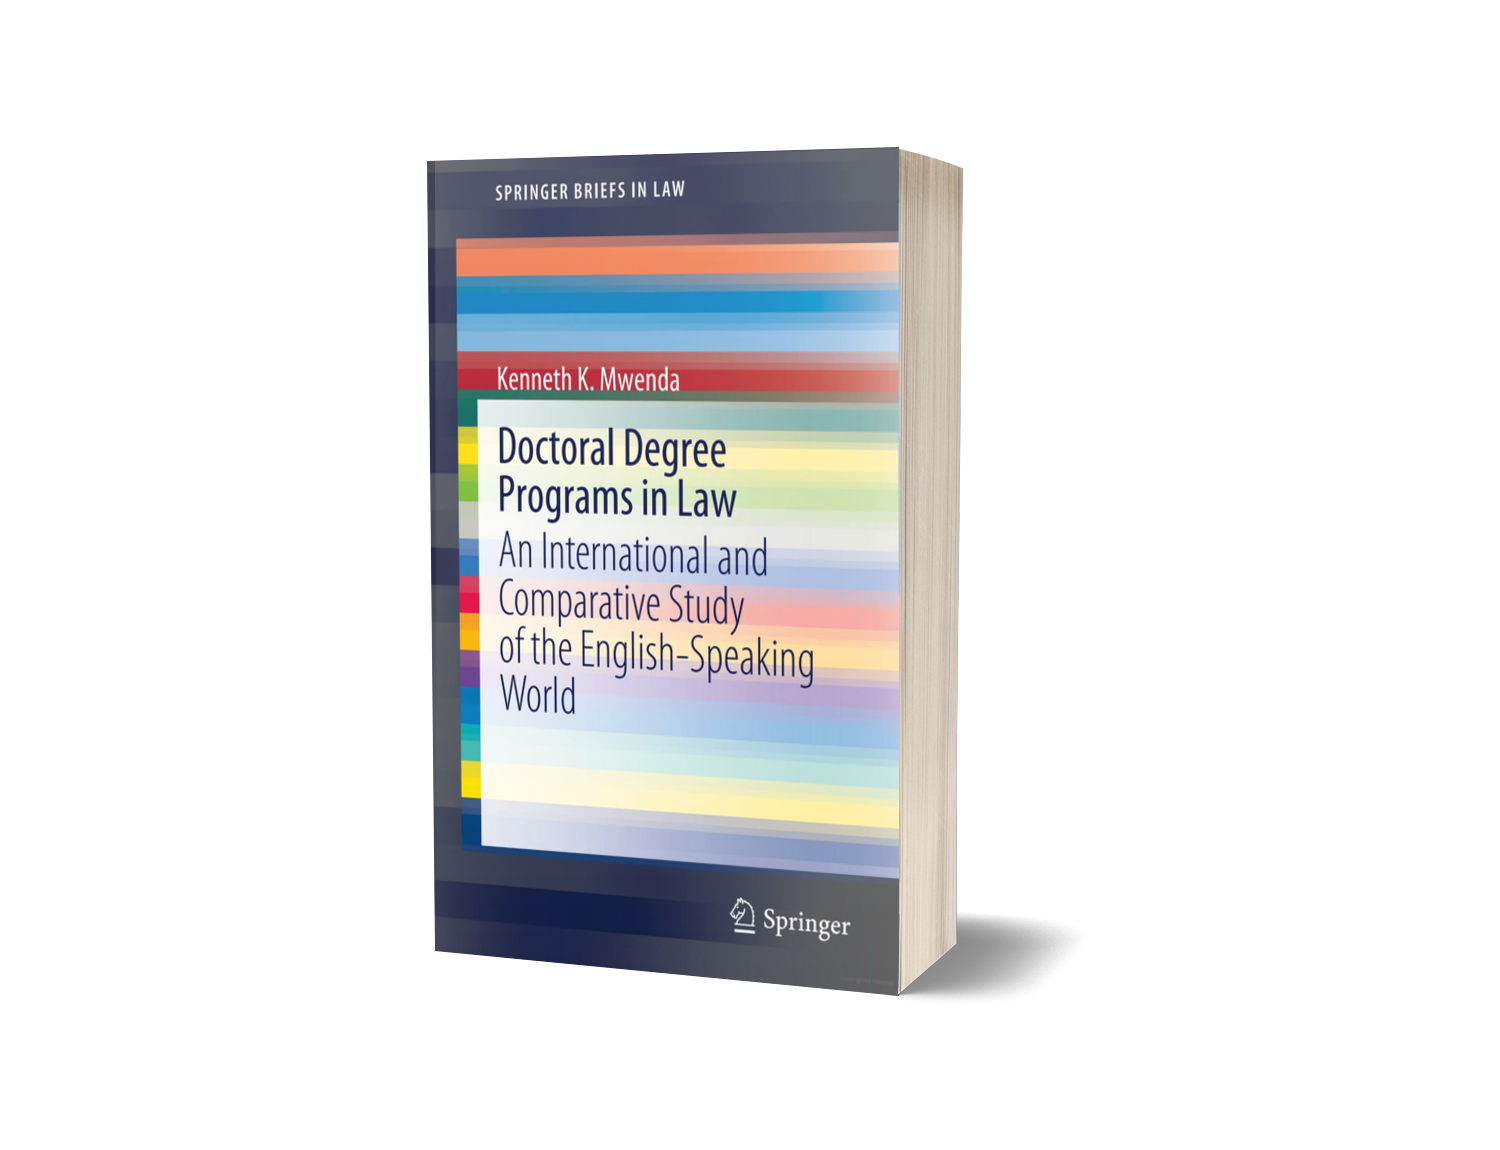 Mwenda, Kenneth Doctoral Degree Programs in Law: An International and Comparative Study of the English-speaking World (2022) Springer,128pp.